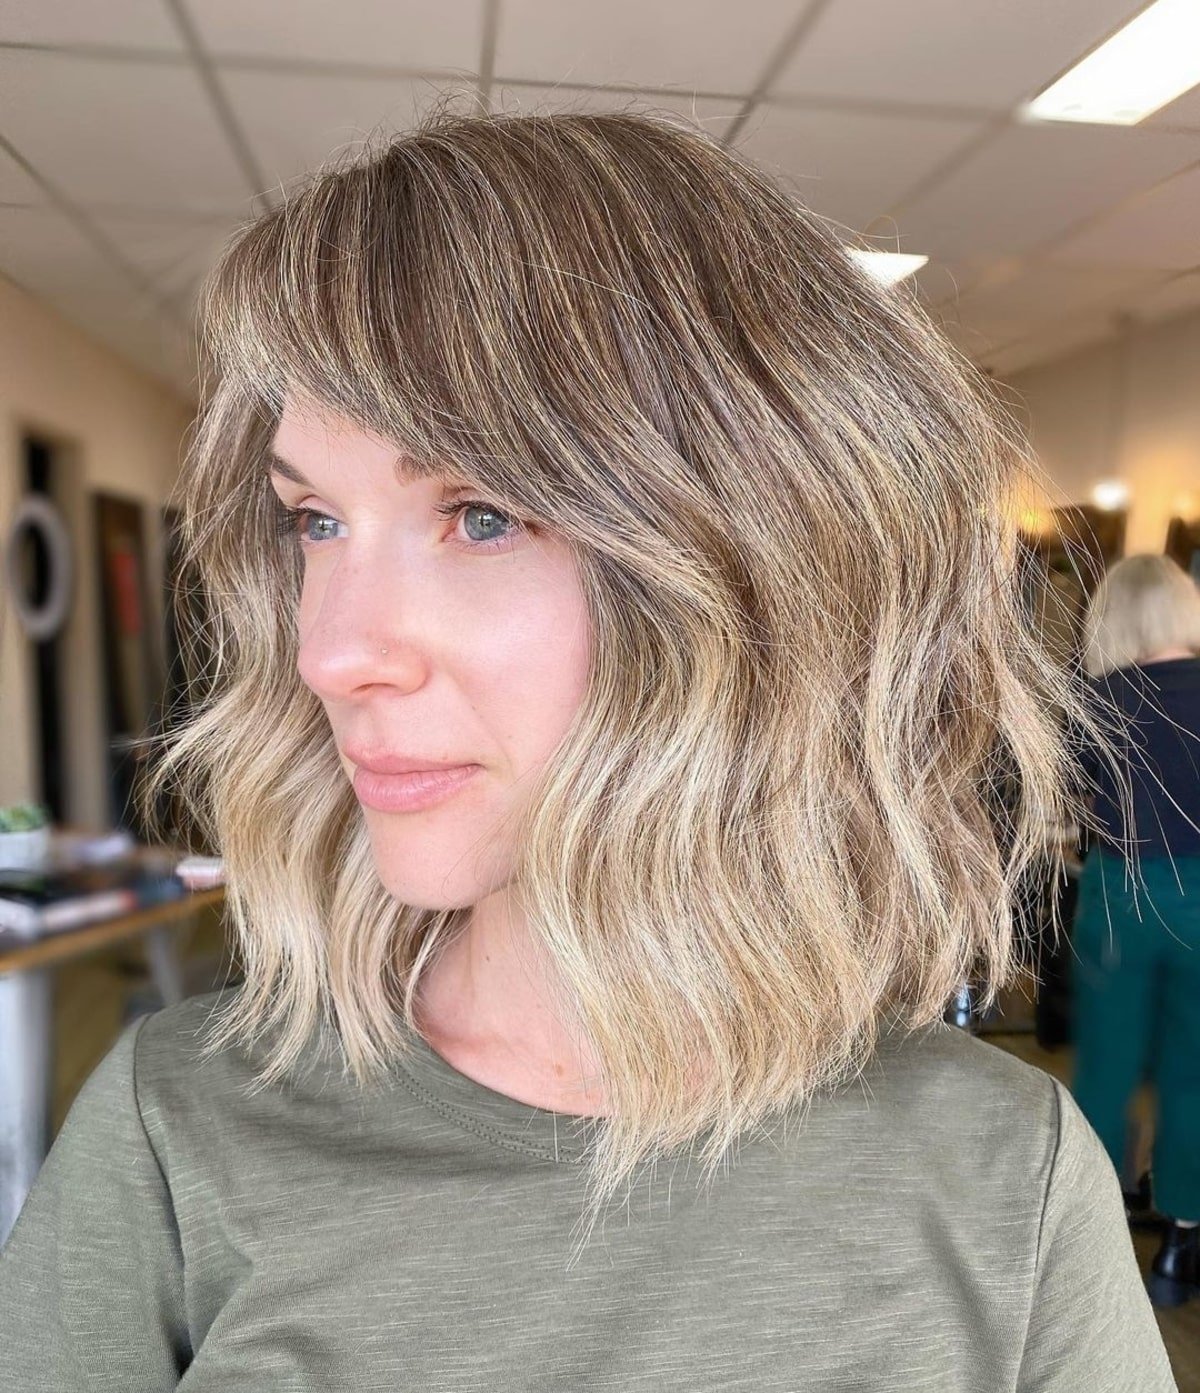 51 Side-Swept Bangs to Try When You're Bored With Your Hair